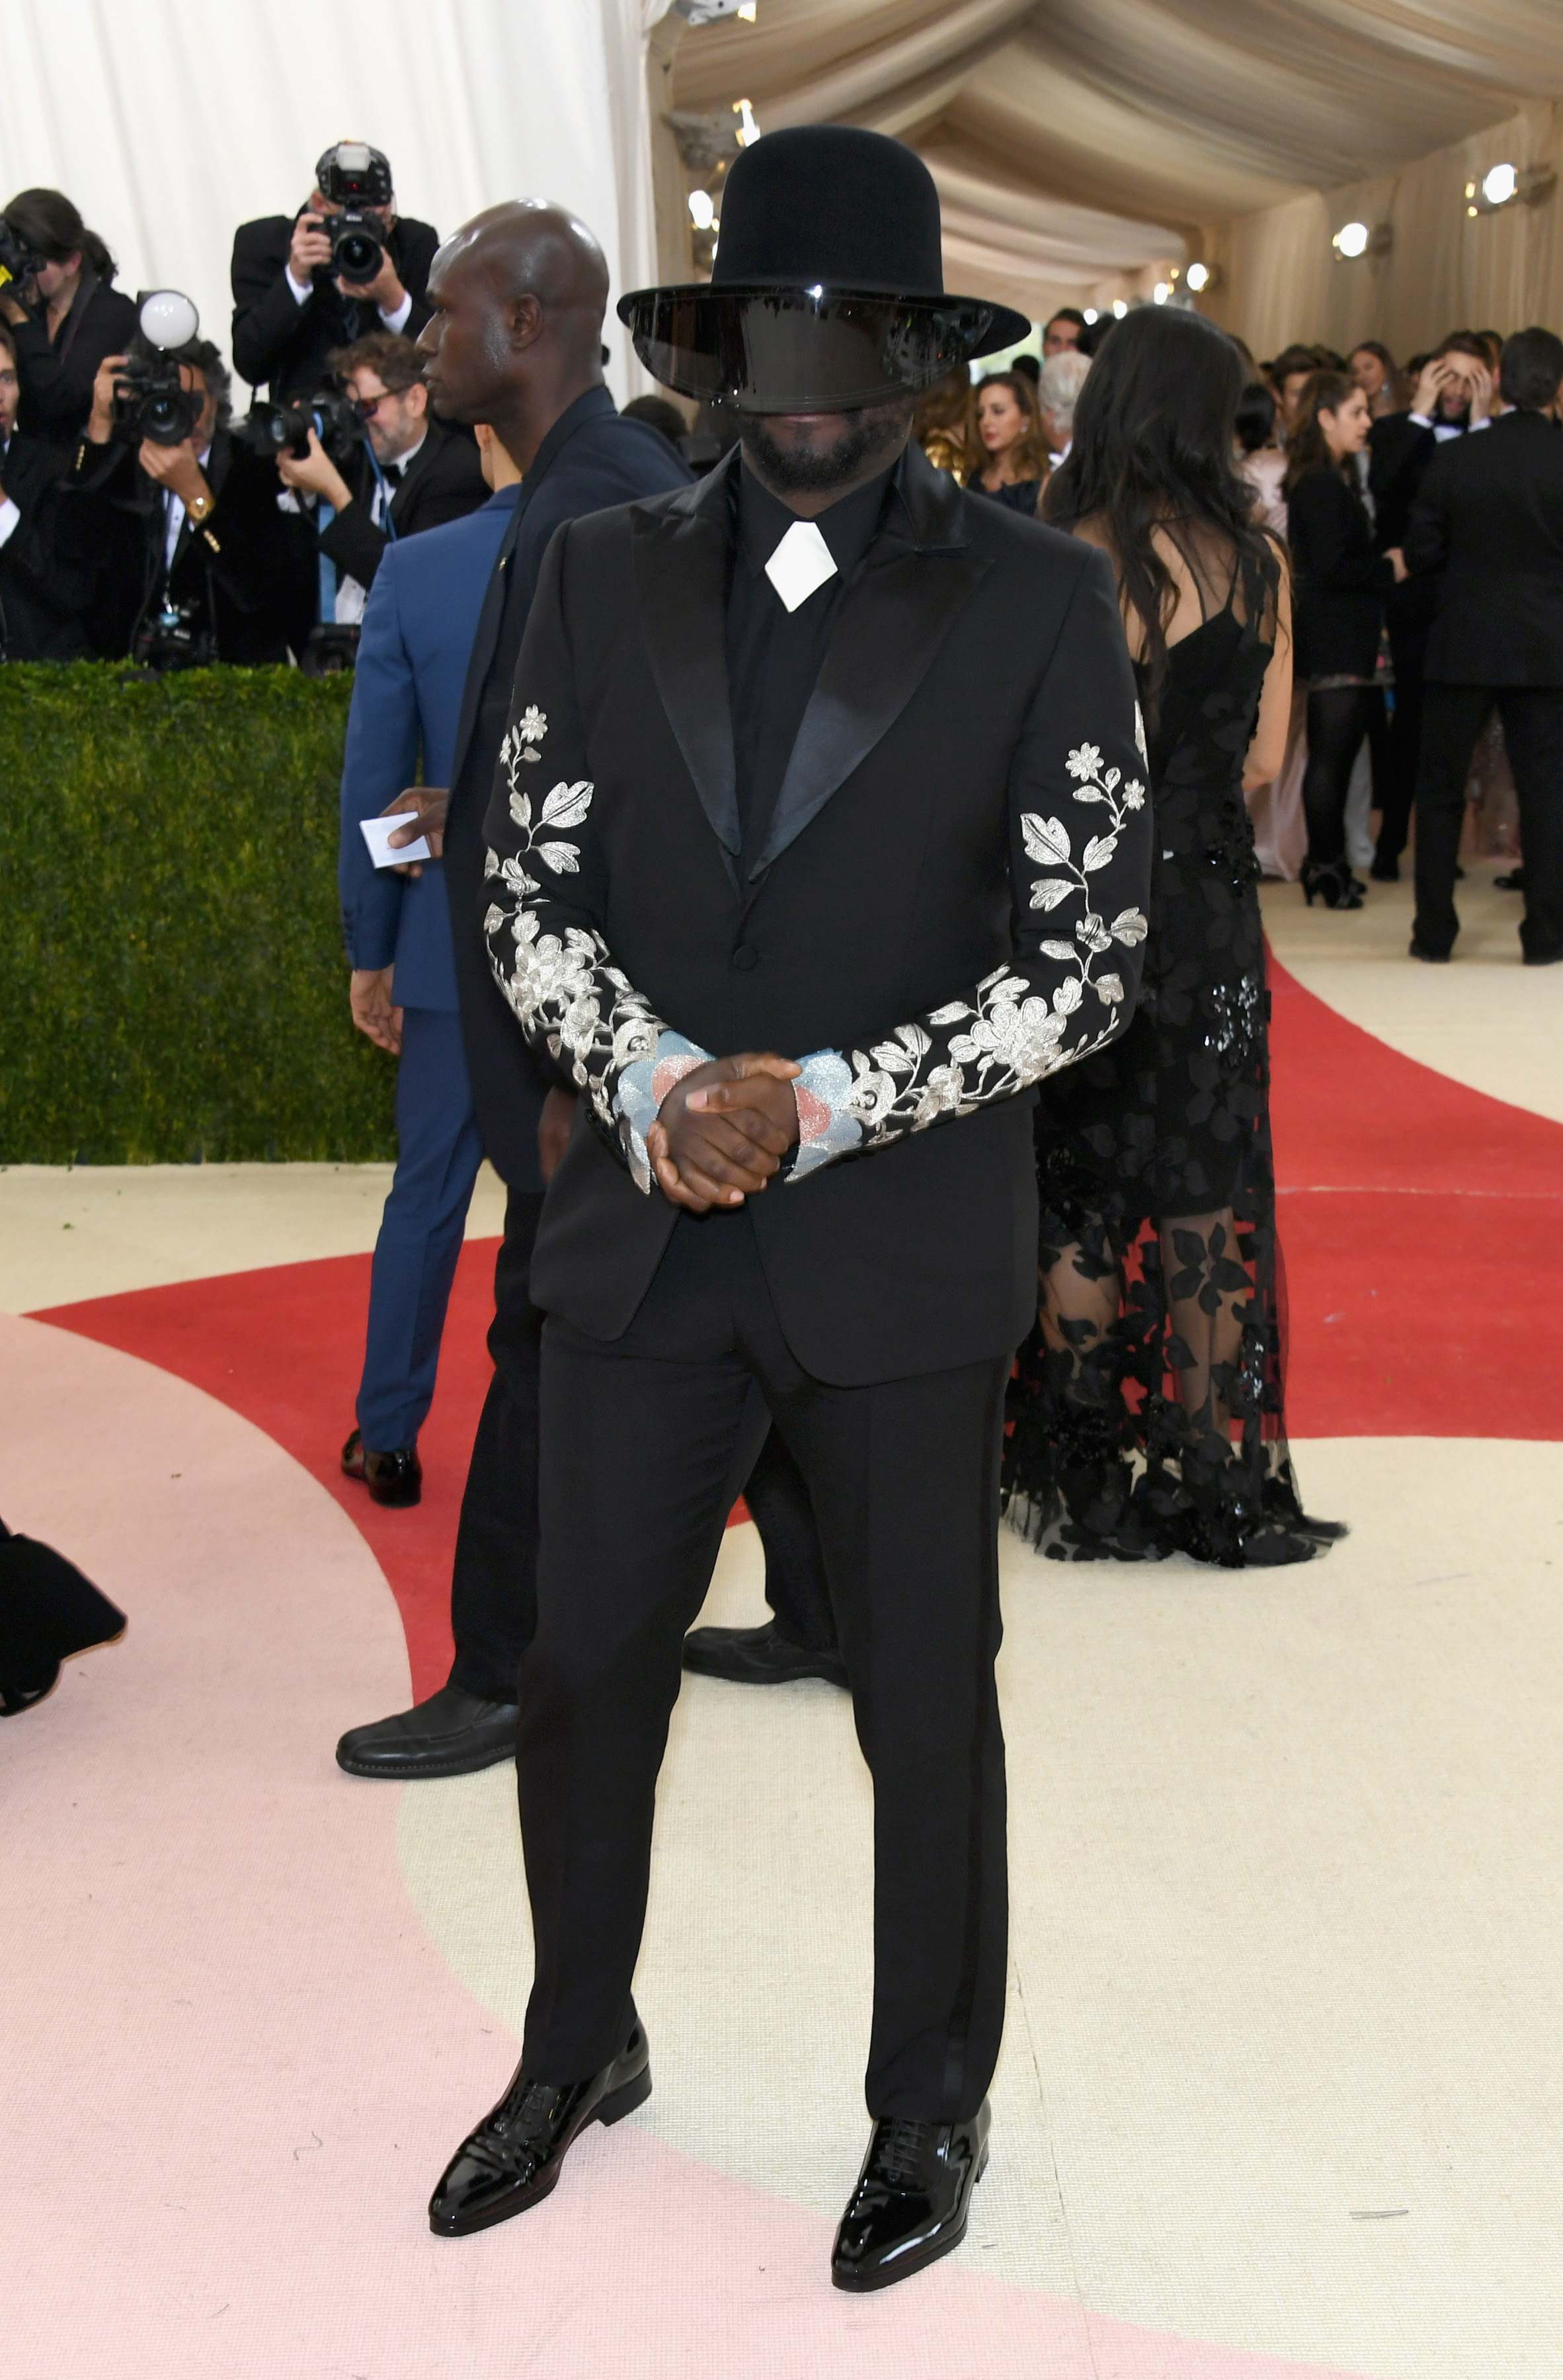 will.i.am attends "Manus x Machina: Fashion In An Age Of Technology" Costume Institute Gala at Metropolitan Museum of Art on May 2, 2016 in New York City.